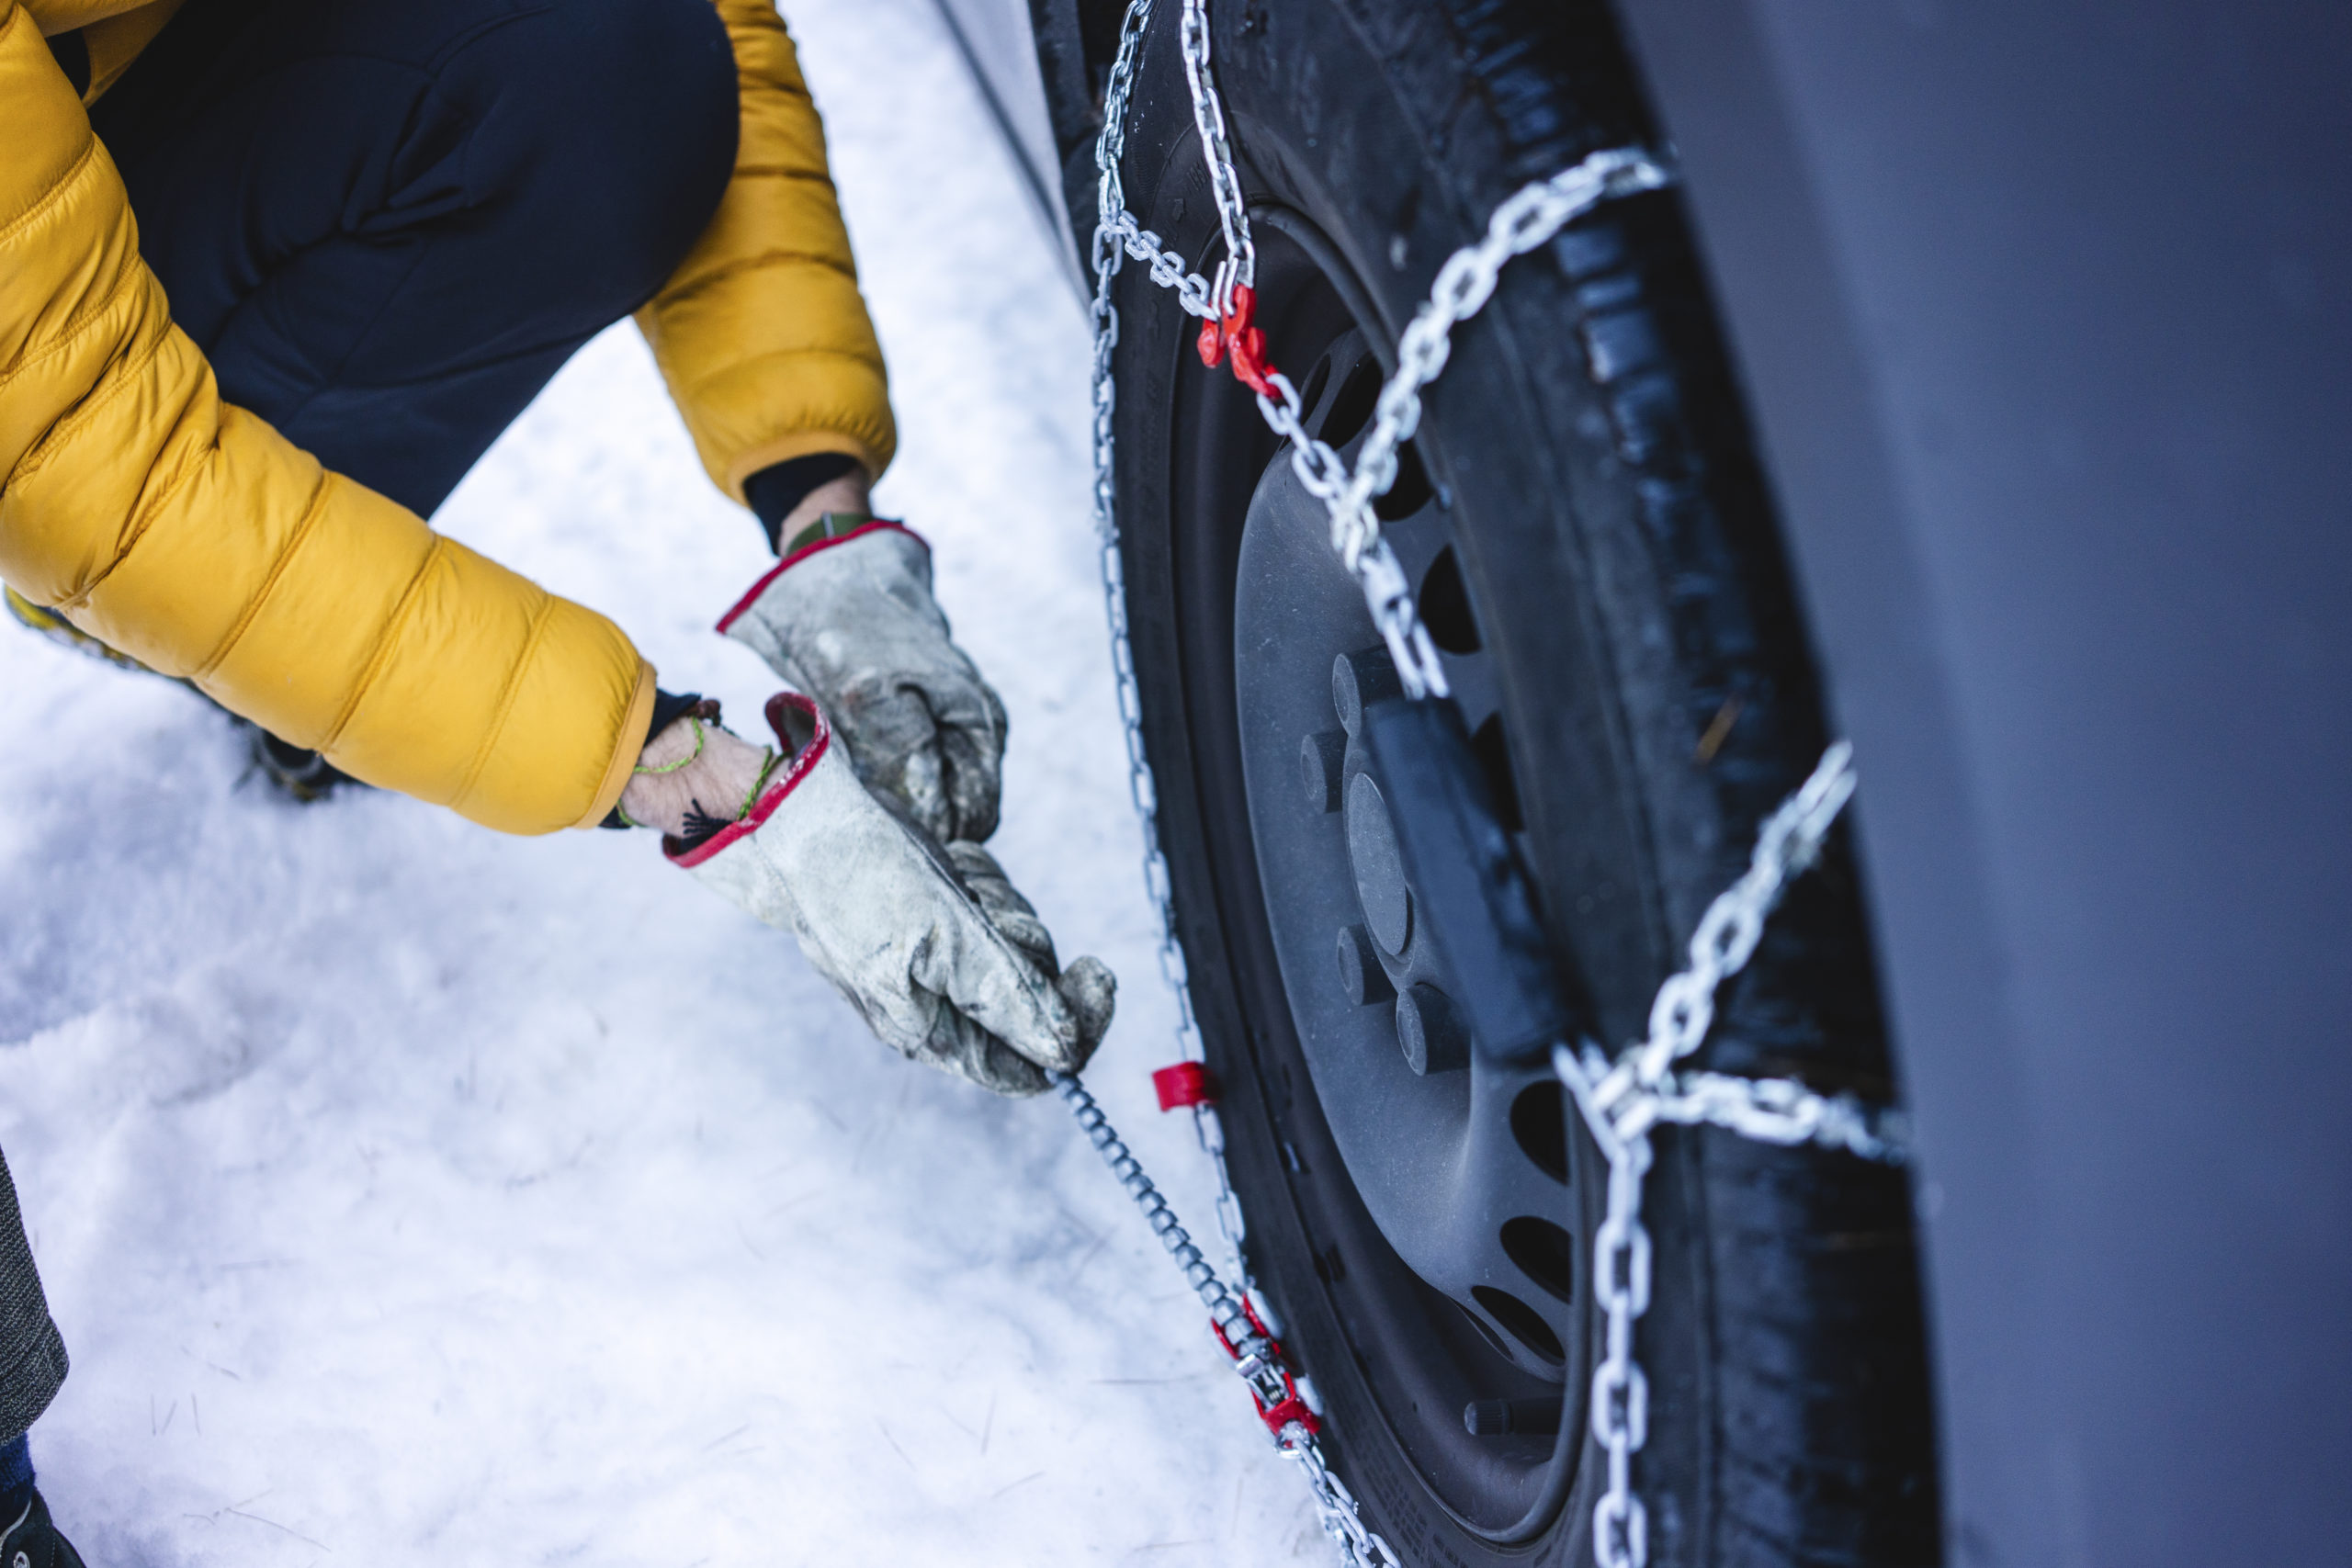 https://autolab.com.co/wp-content/uploads/man-putting-the-snow-chains-on-his-car-2022-12-16-22-06-12-utc-scaled.jpg